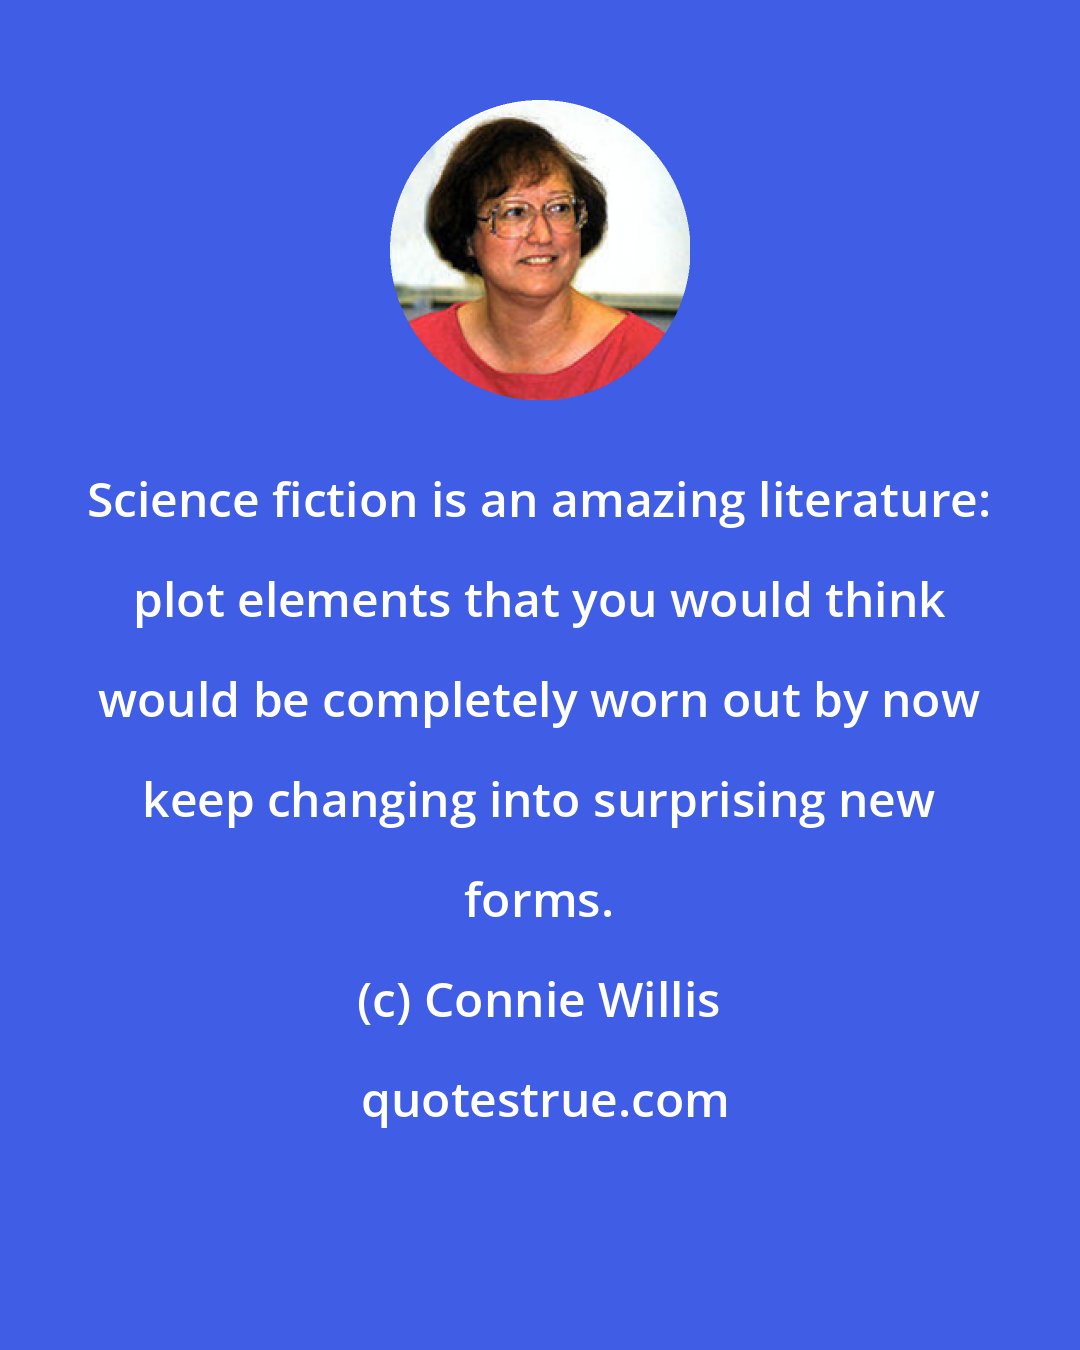 Connie Willis: Science fiction is an amazing literature: plot elements that you would think would be completely worn out by now keep changing into surprising new forms.